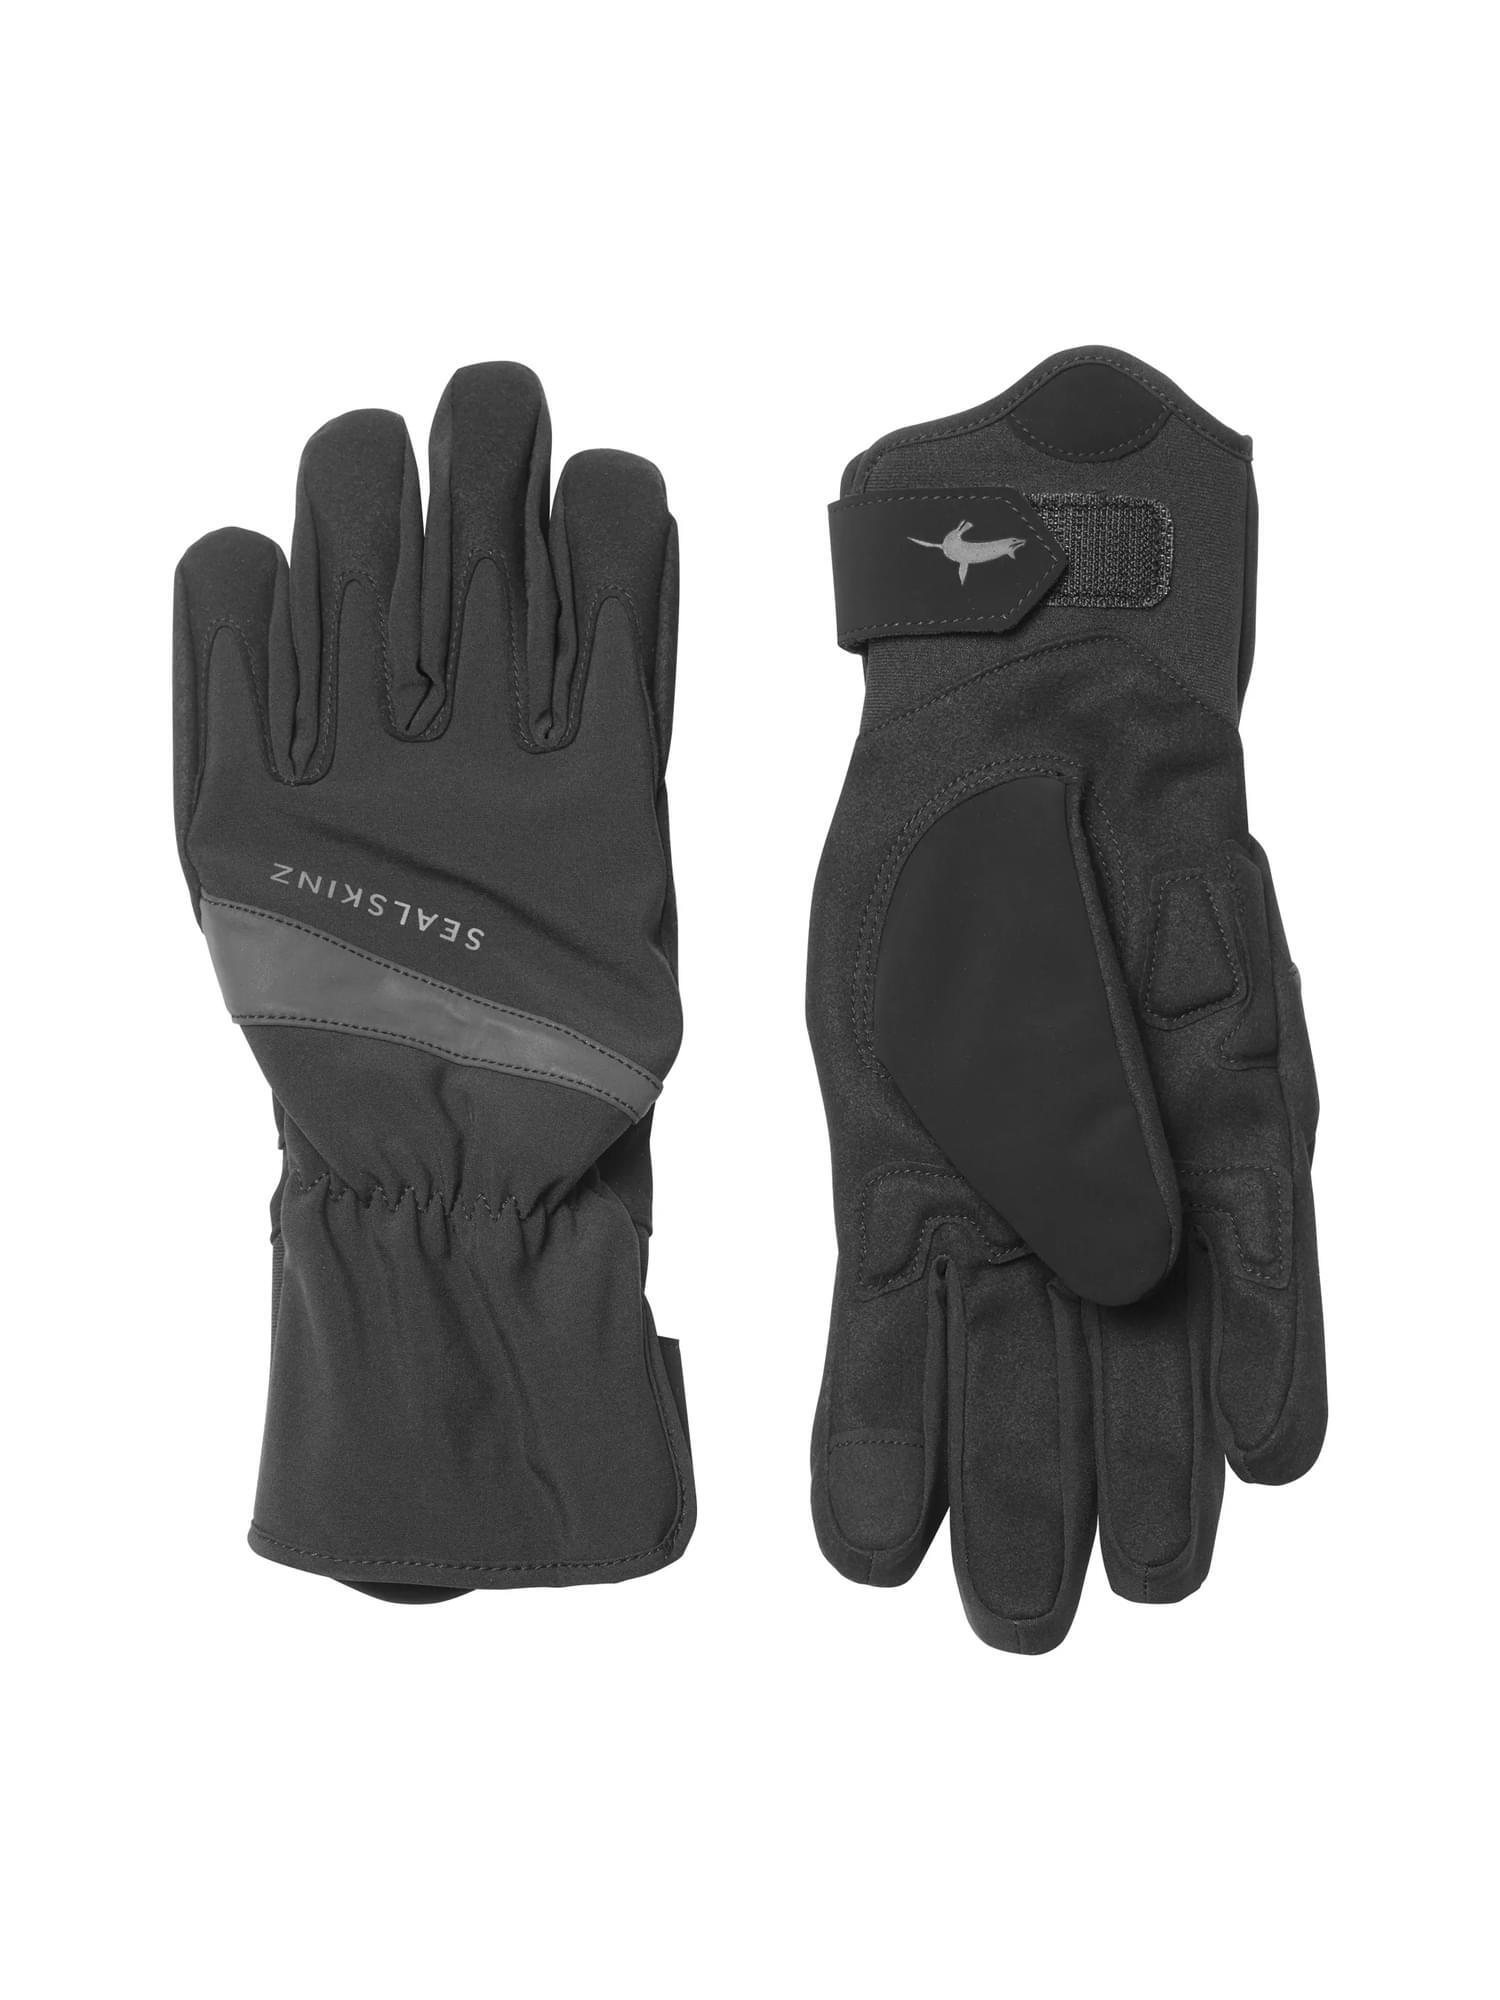 Mens Waterproof All Weather Cycle Gloves 1/3